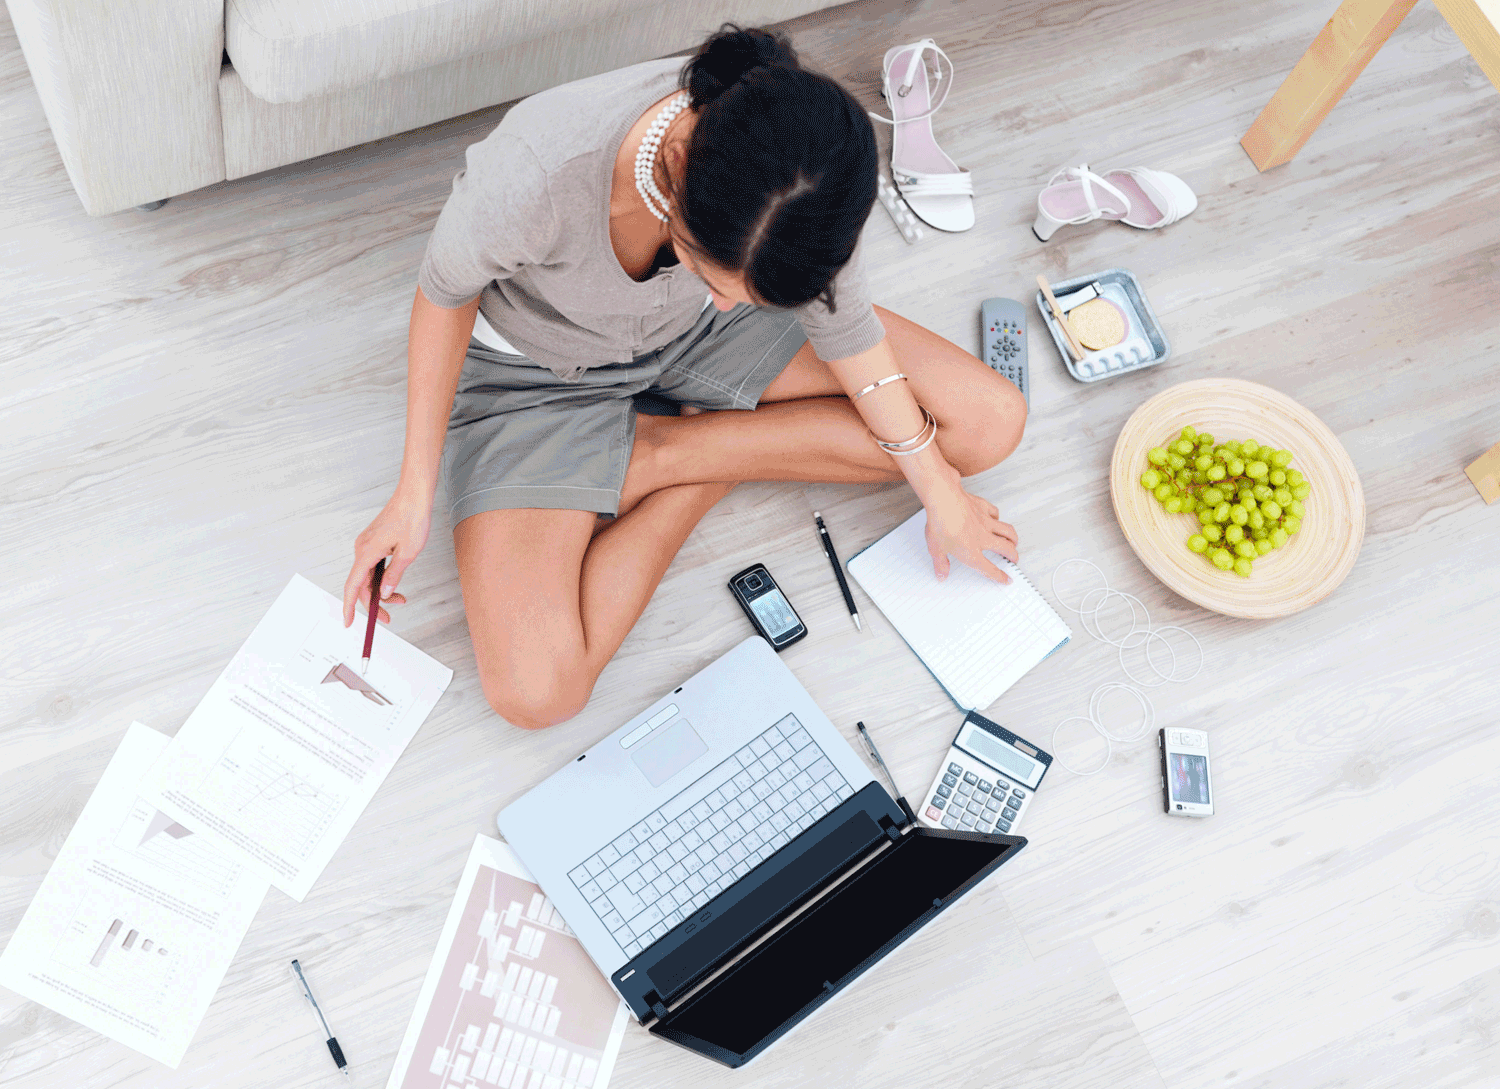 9 Signs You Are An Over-Committed College Student